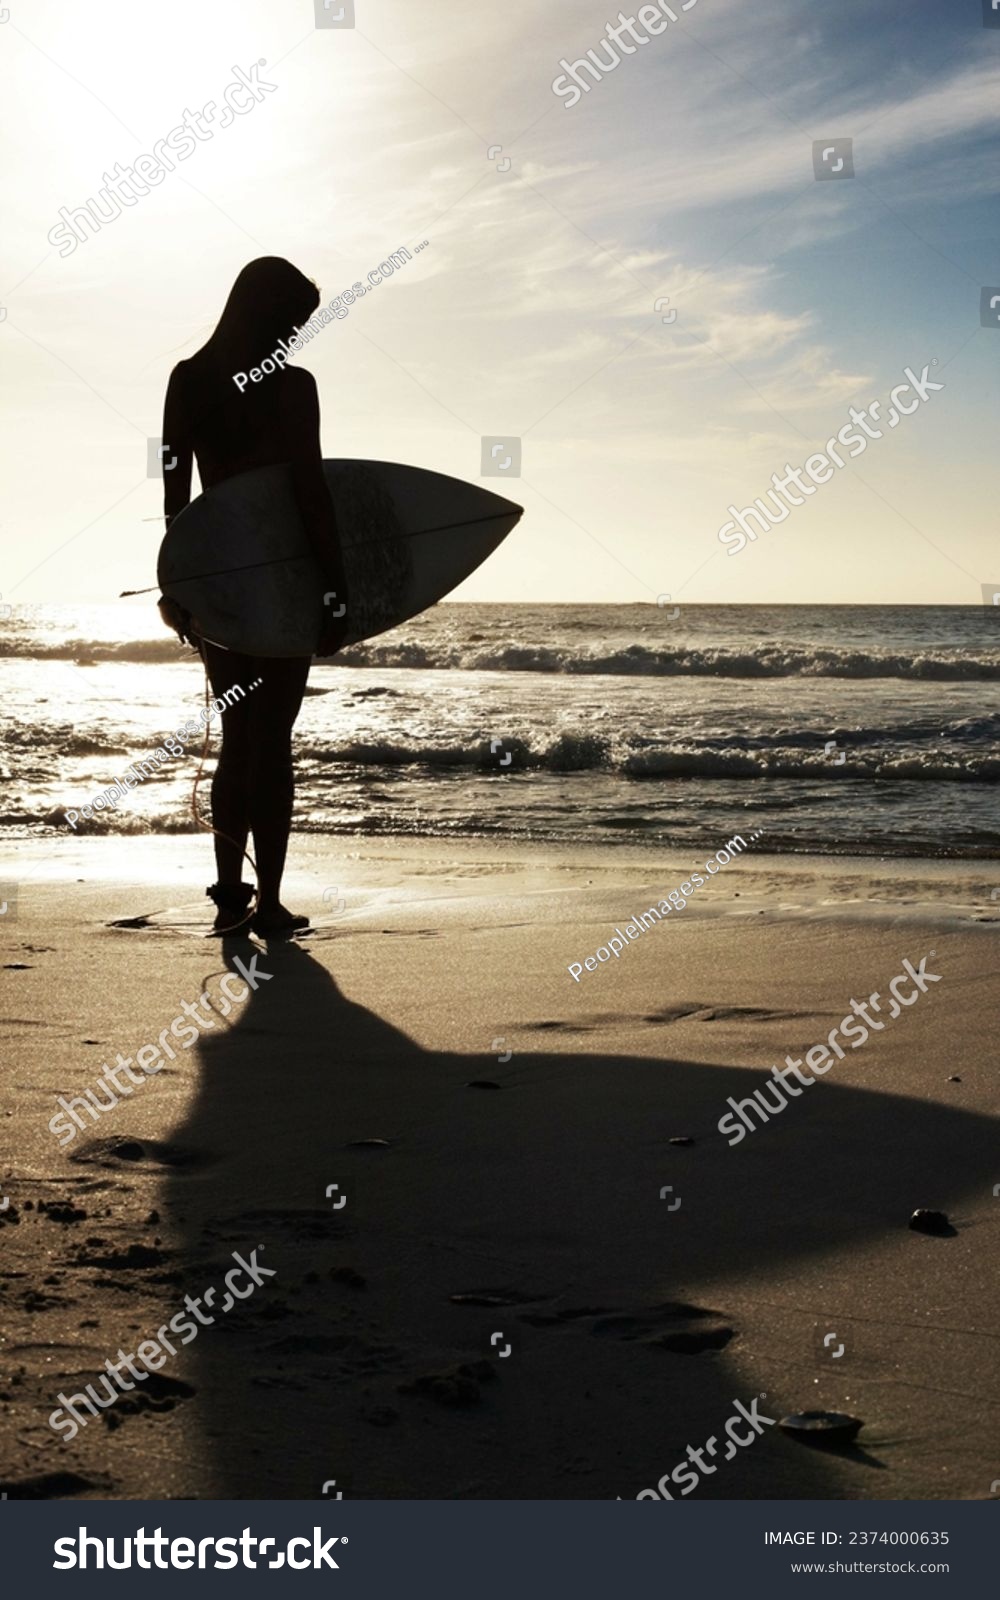 Silhouette, woman surfer on beach sand and ocean, exercise outdoor and healthy with surfboard and scenic sea view. Sports, shadow and sun with female person in nature and ready to surf for fitness #2374000635